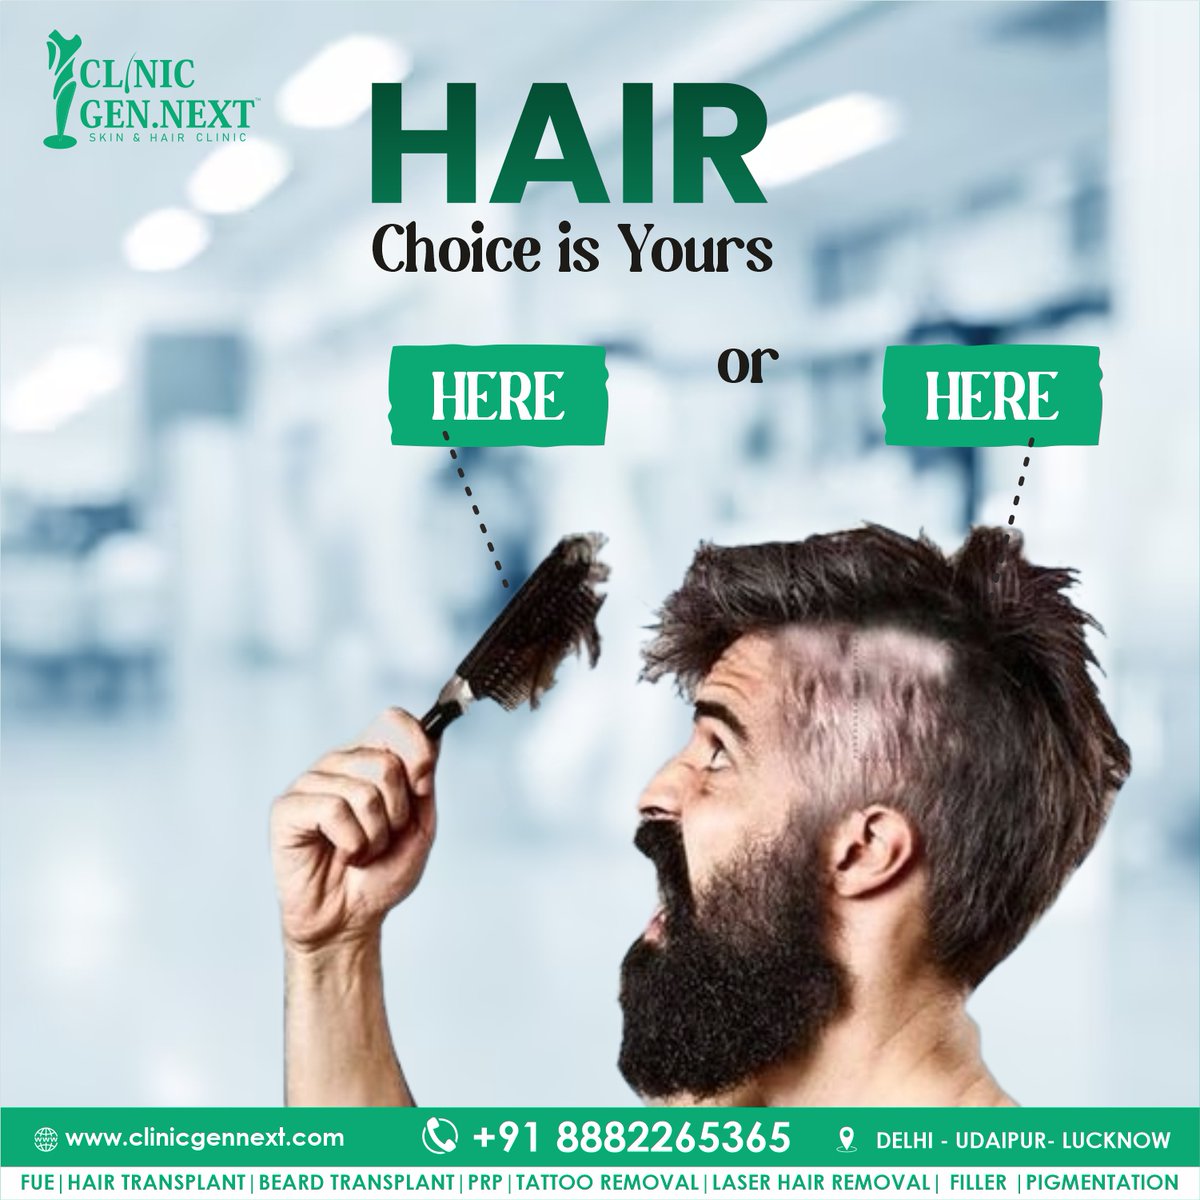 Hair Choice is Yours

Consult Our Experts Now

#ClinicGenNext #HairTransplant #SkinTreatment #Wrinkles #Moles #Acne #SkinCare #HairLossSolution #ConfidenceBoost #FUE #FUT #FreeConsultation #HairCare #Dermatology #Skintreatment #Skinproblem #Wrinkles #Moles #Blackheads #Acne